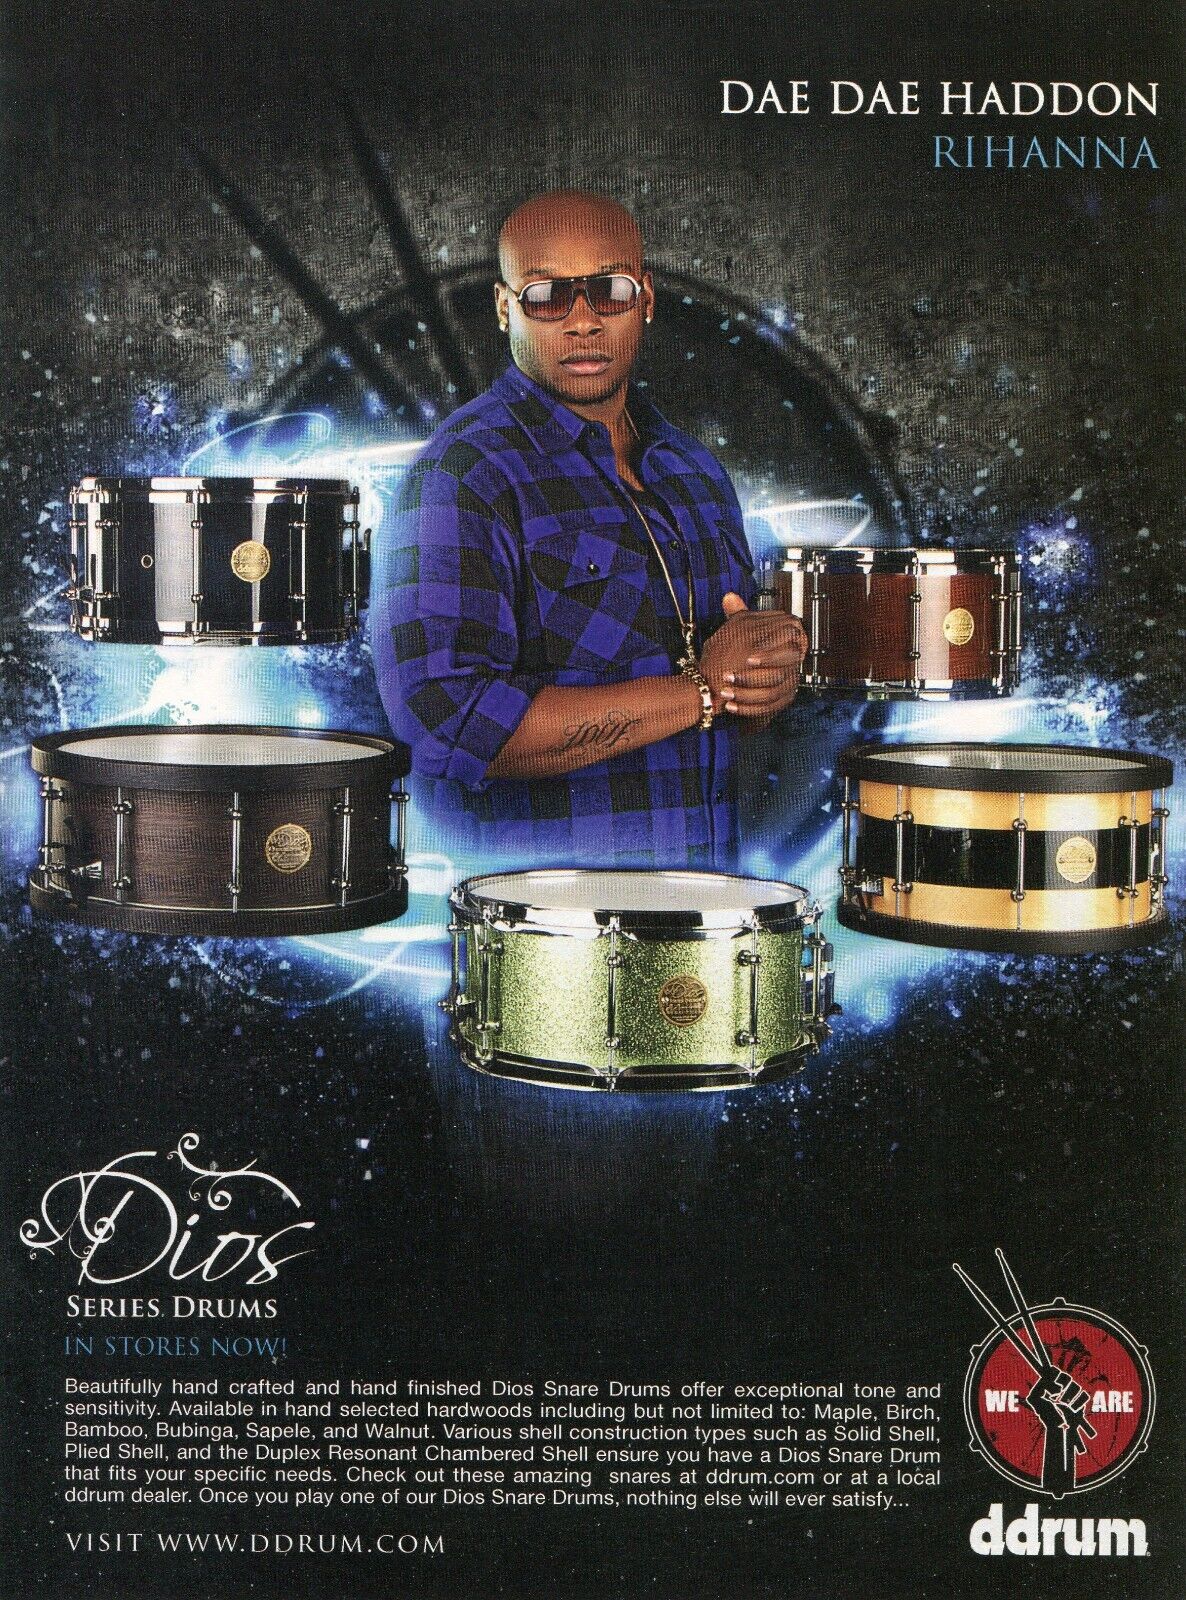 2009 Print Ad of ddrum Dios Series Snare Drums w Dae Dae Haddon of Rihanna